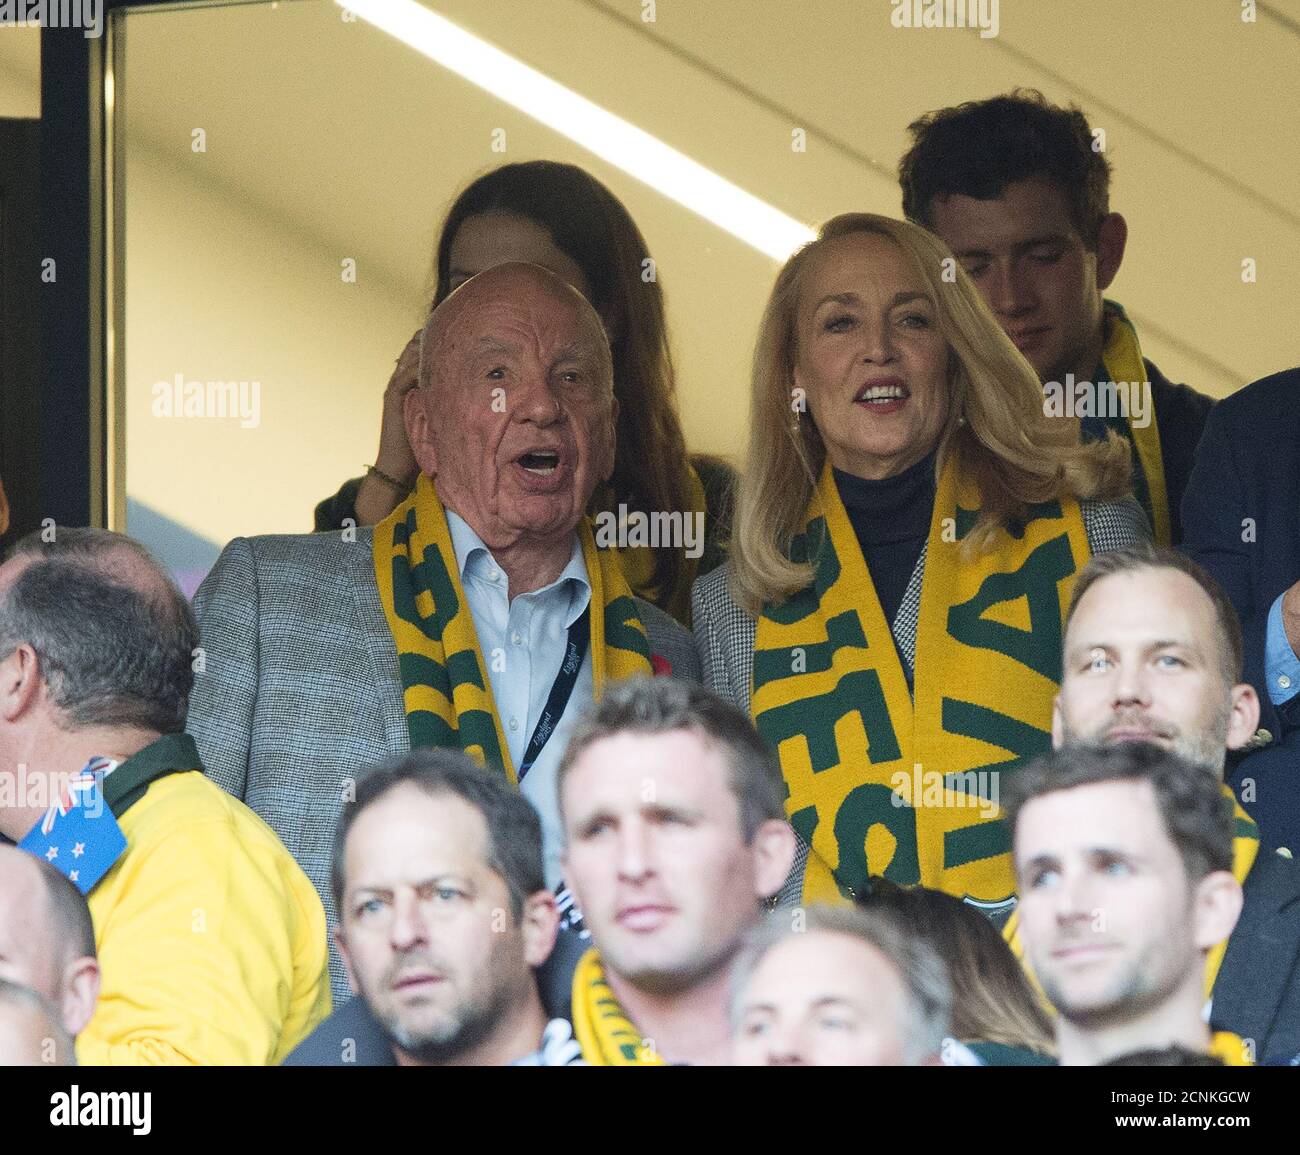 Jerry Hall and Rupert Murdoch in the crowd. New Zealand v Australia Rugby World Cup Final. Twickenham 31/10/2015.  PICTURE CREDIT : MARK PAIN / ALAMY Stock Photo